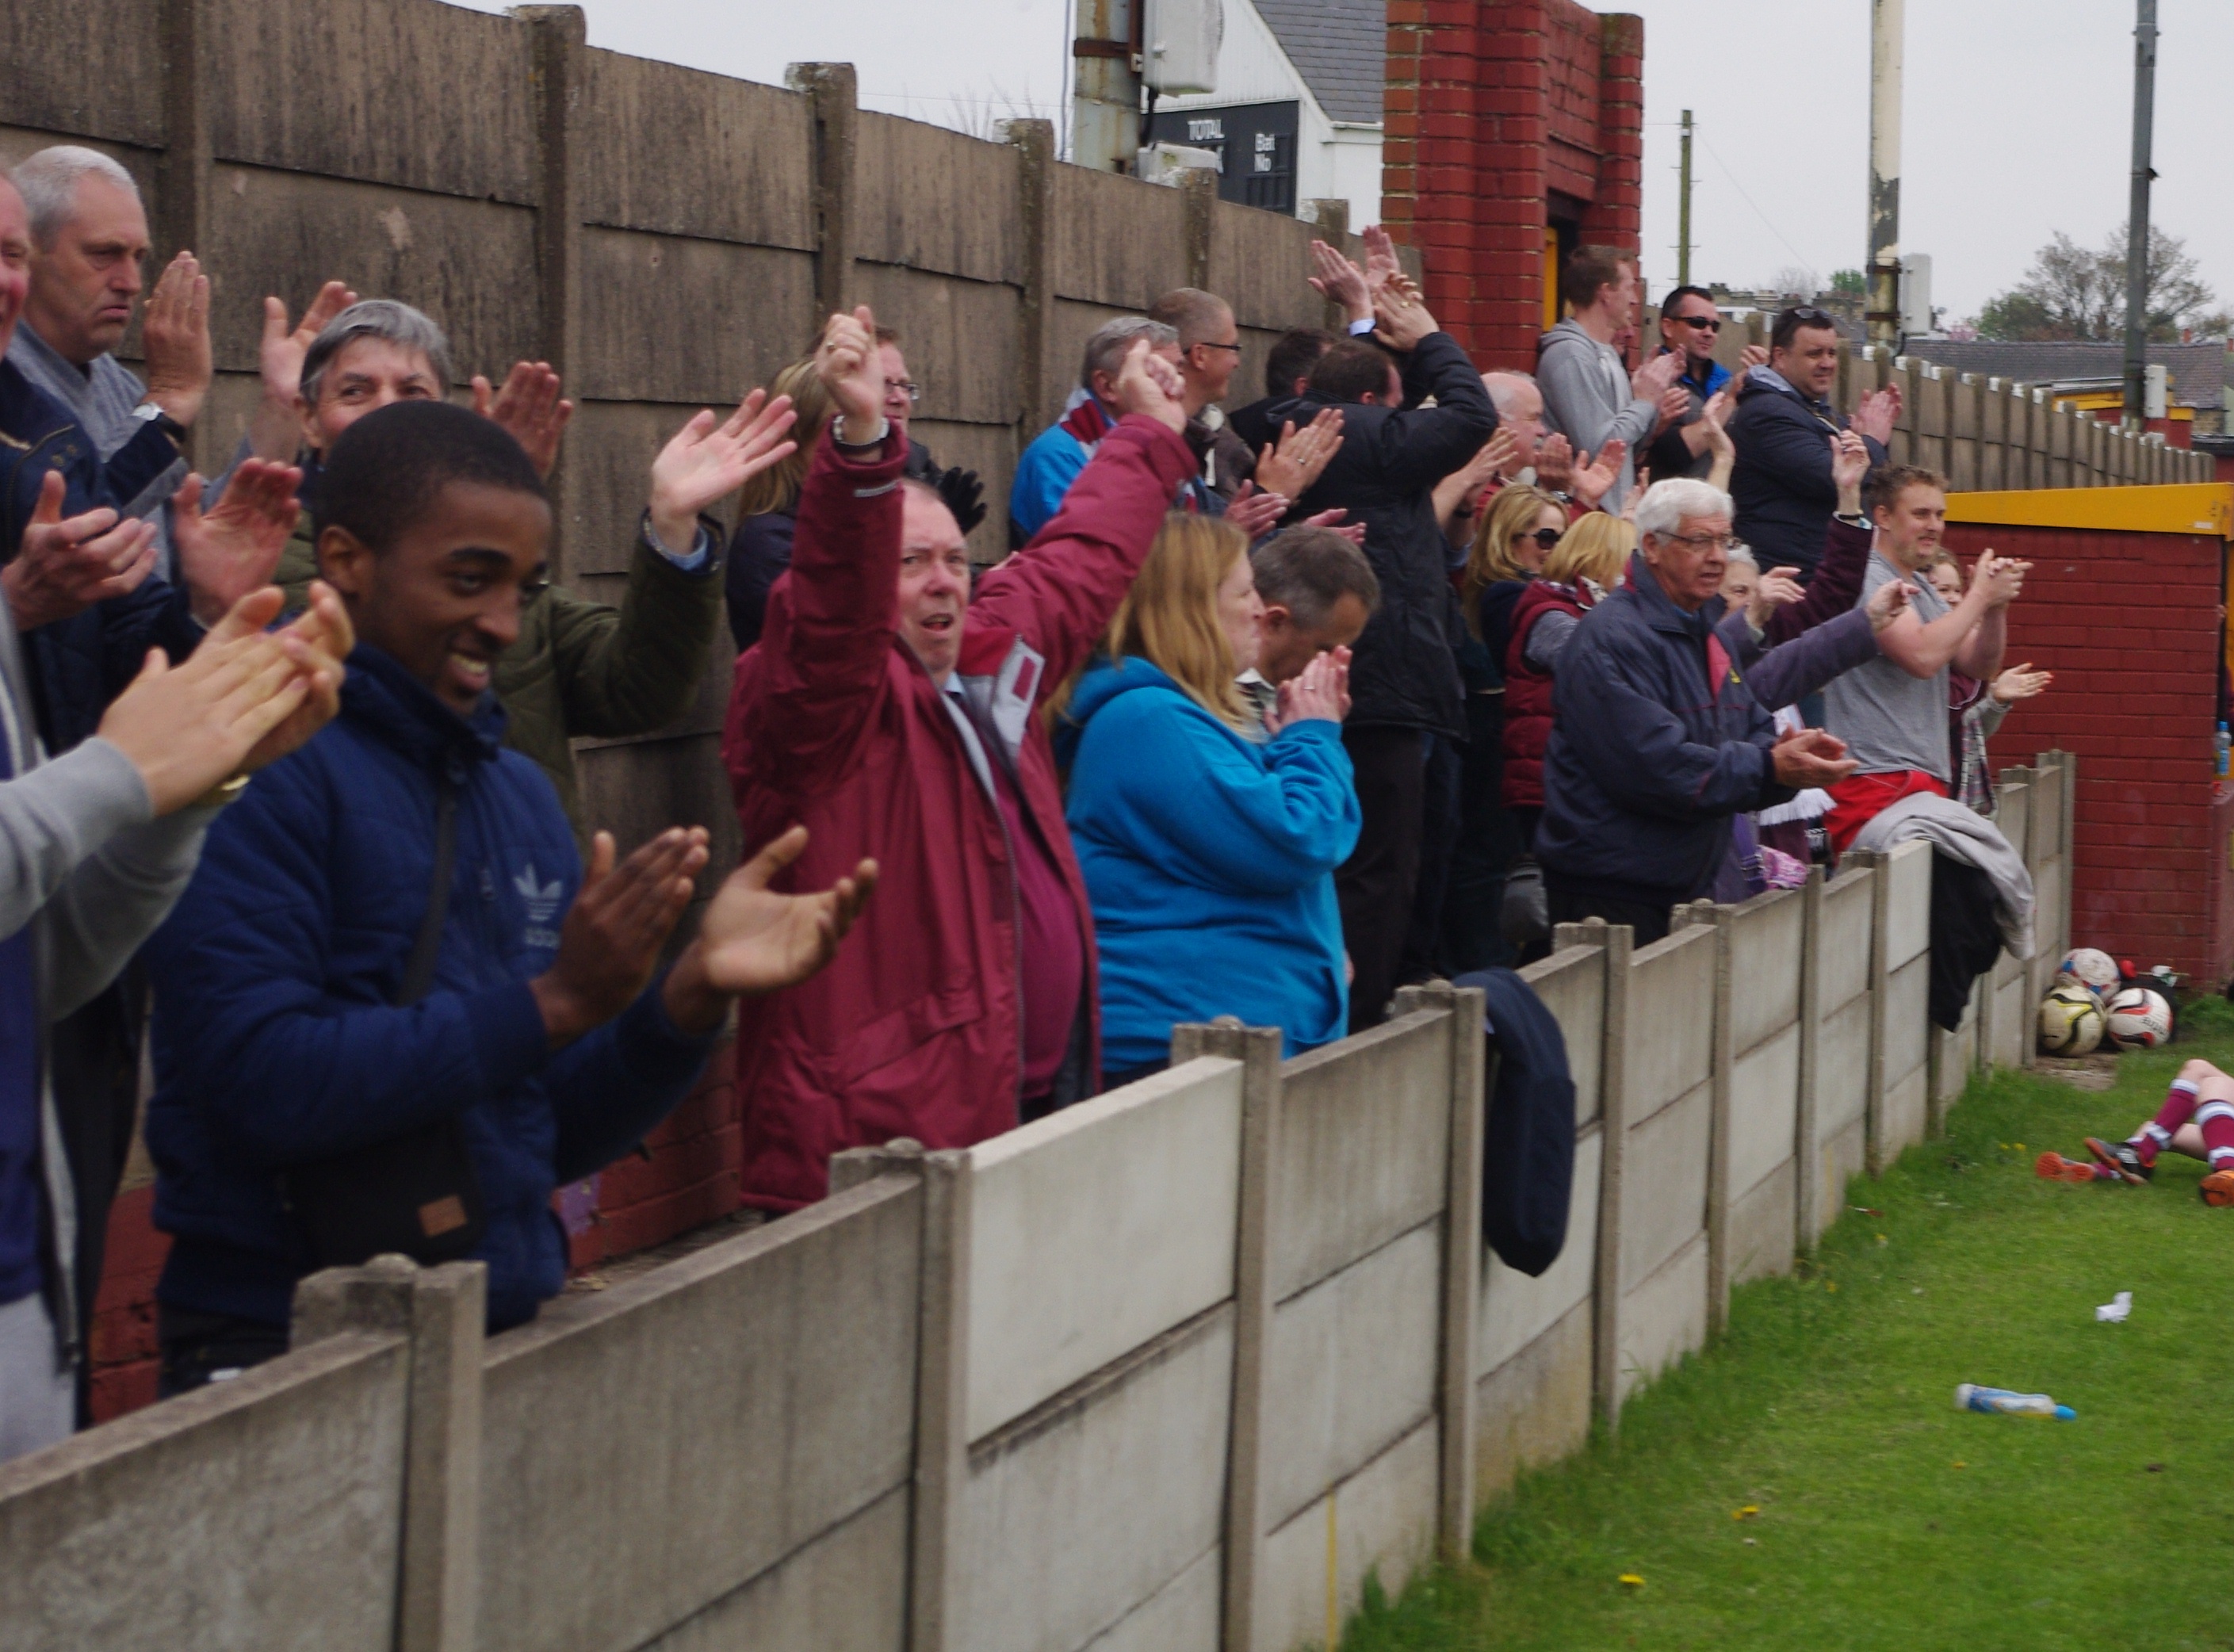 AFC Emley supporters celebrate their team winning the Pat Rice Trophy